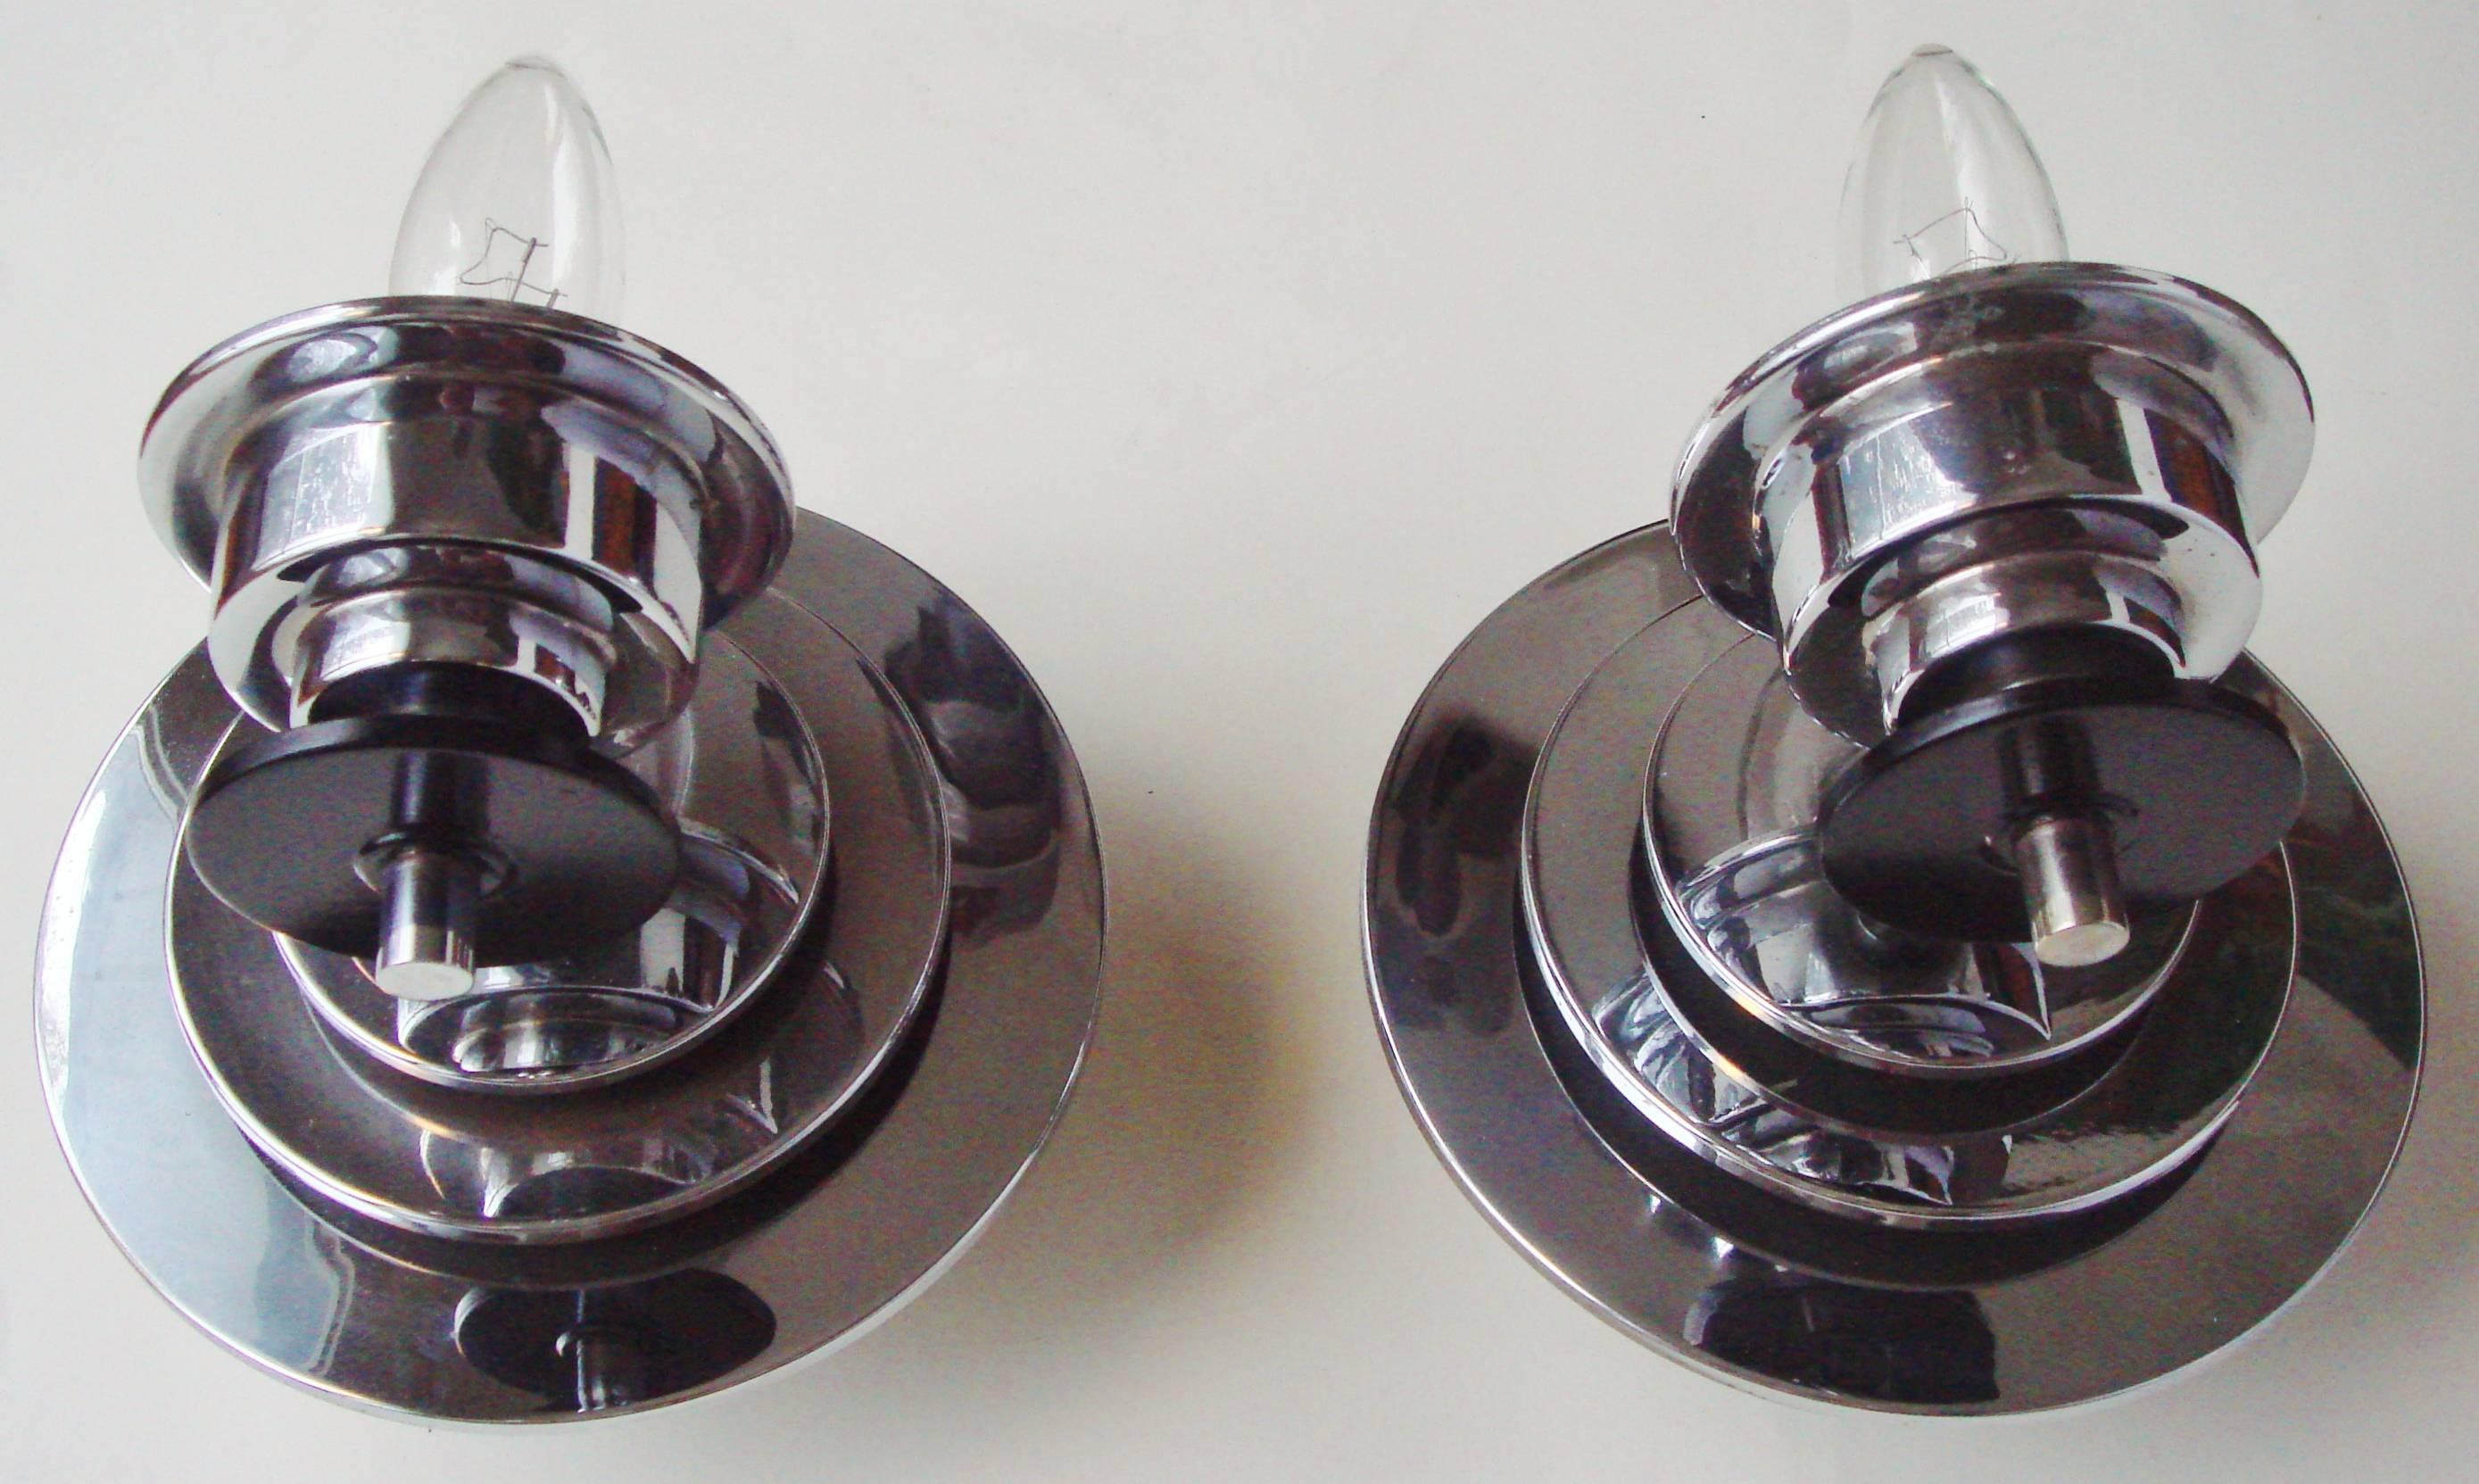 Late 20th Century Pair of American Art Deco Revival Chrome and Black Candle-Form Wall Sconces